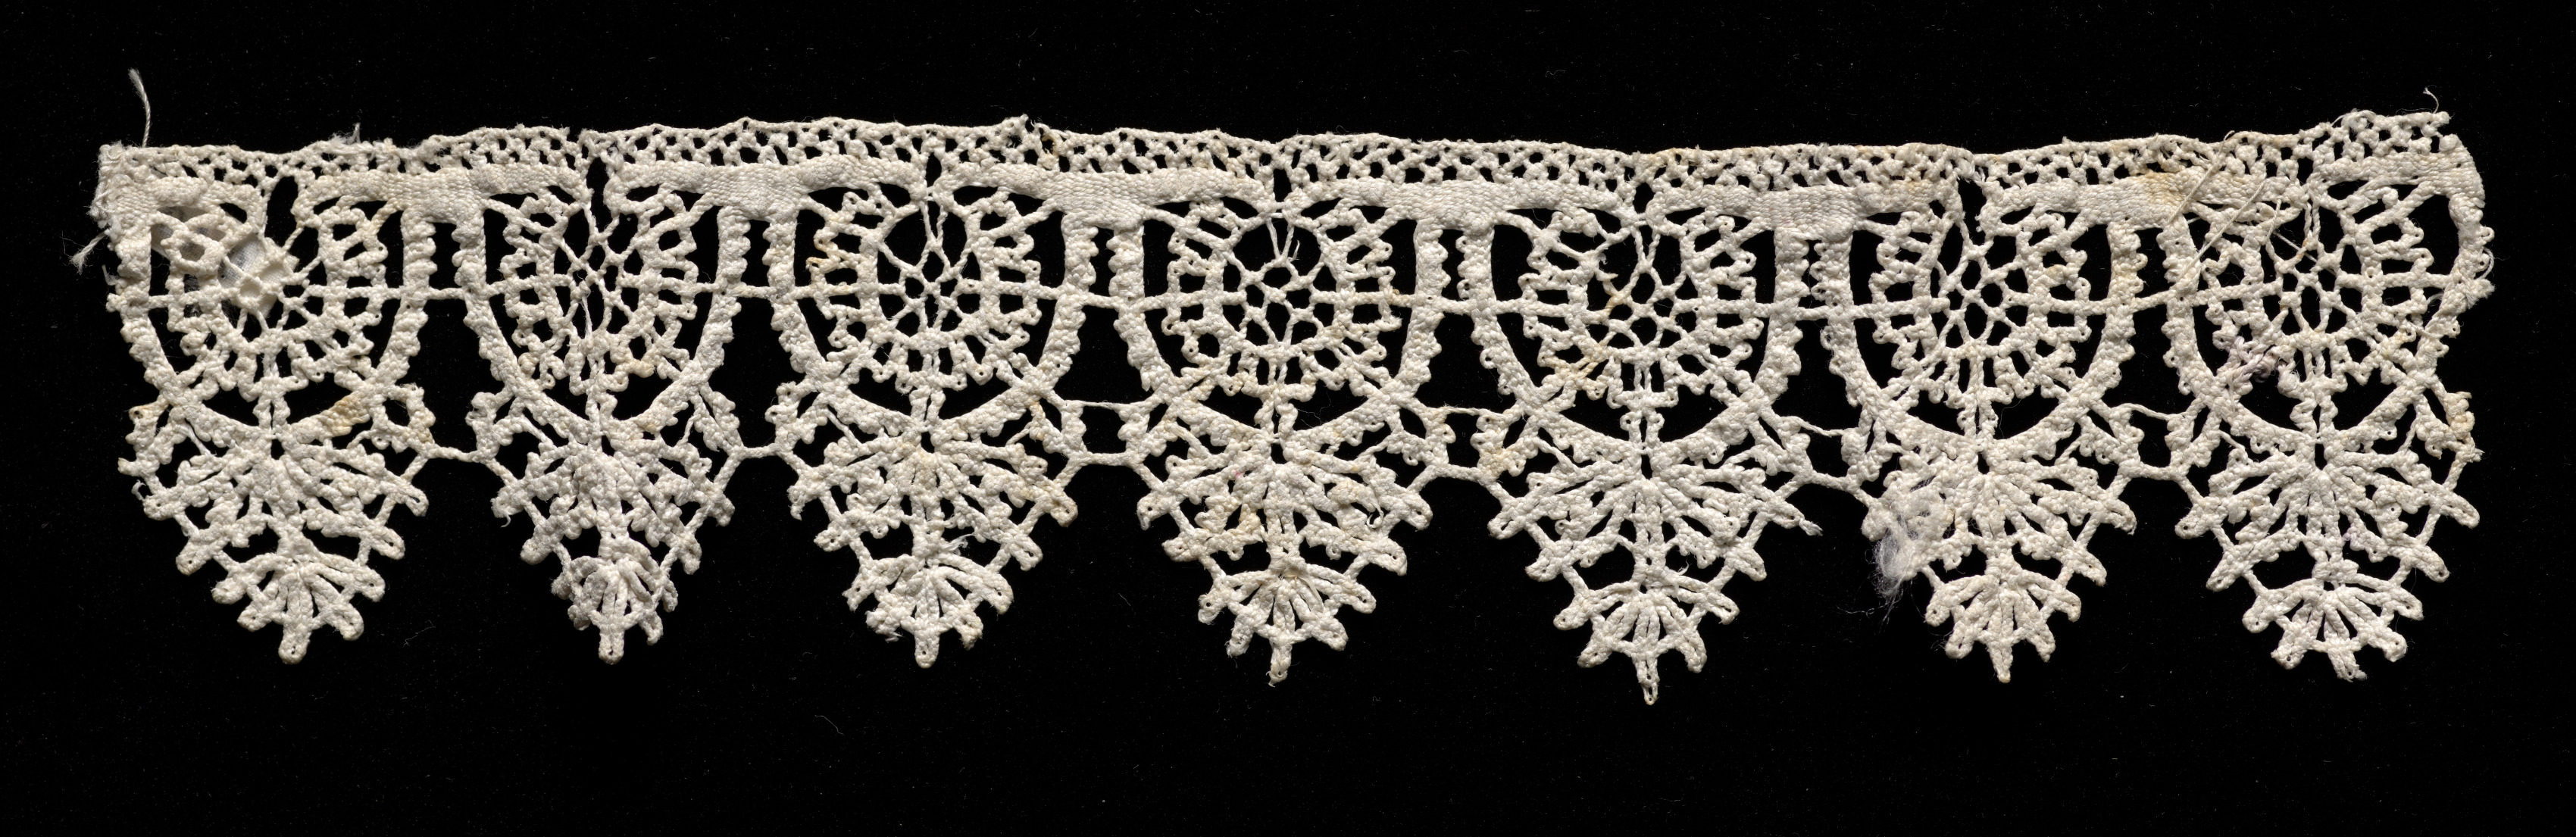 Bobbin Lace (Rose Lace) Edging of Points